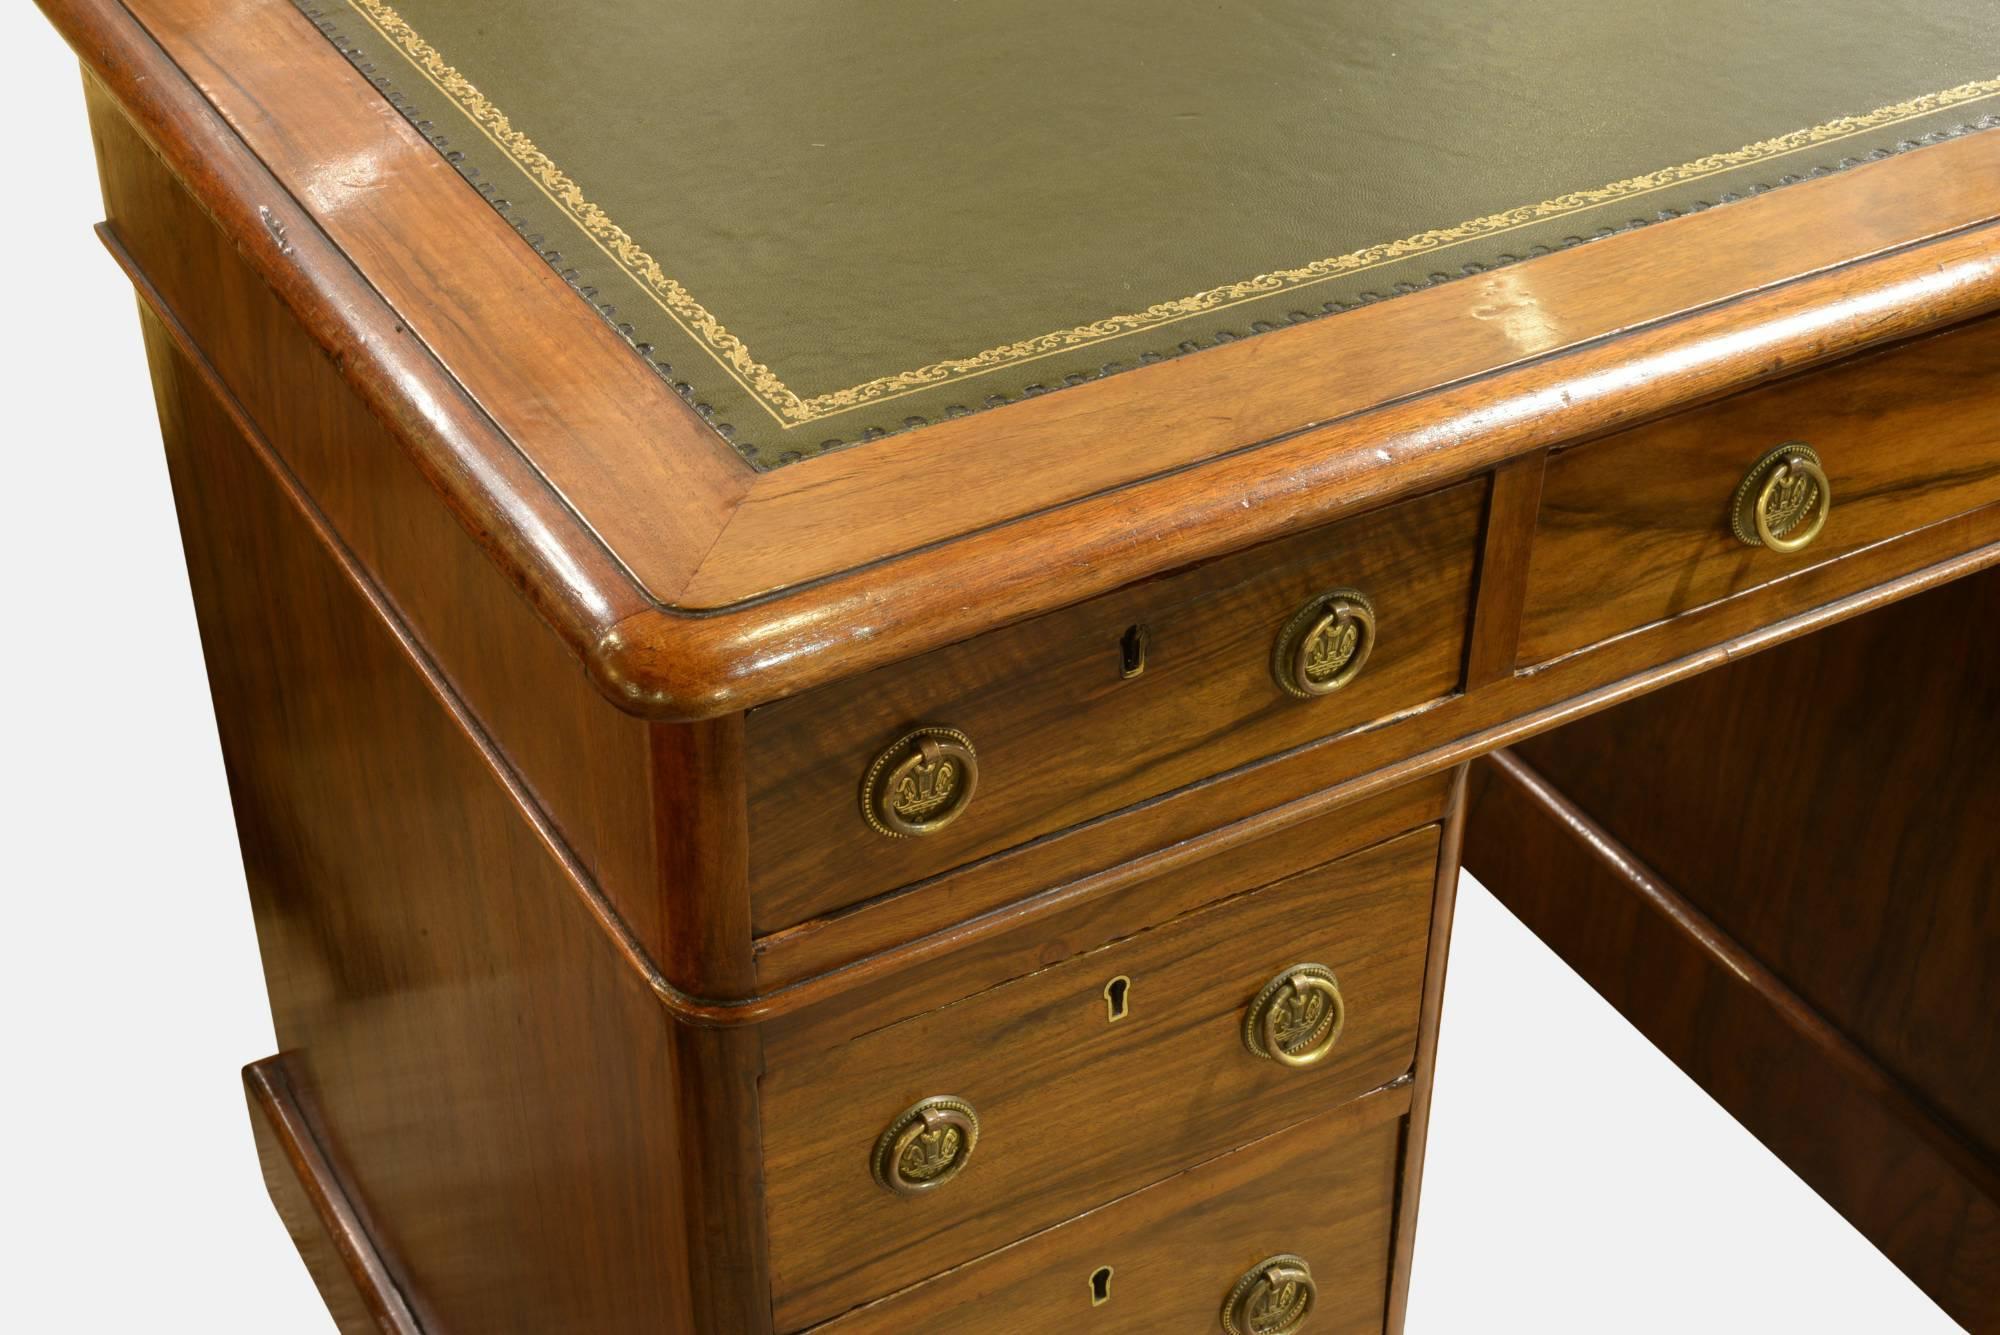 A Victorian walnut kneehole pedestal desk with green leather inset writing surface, circa 1880.